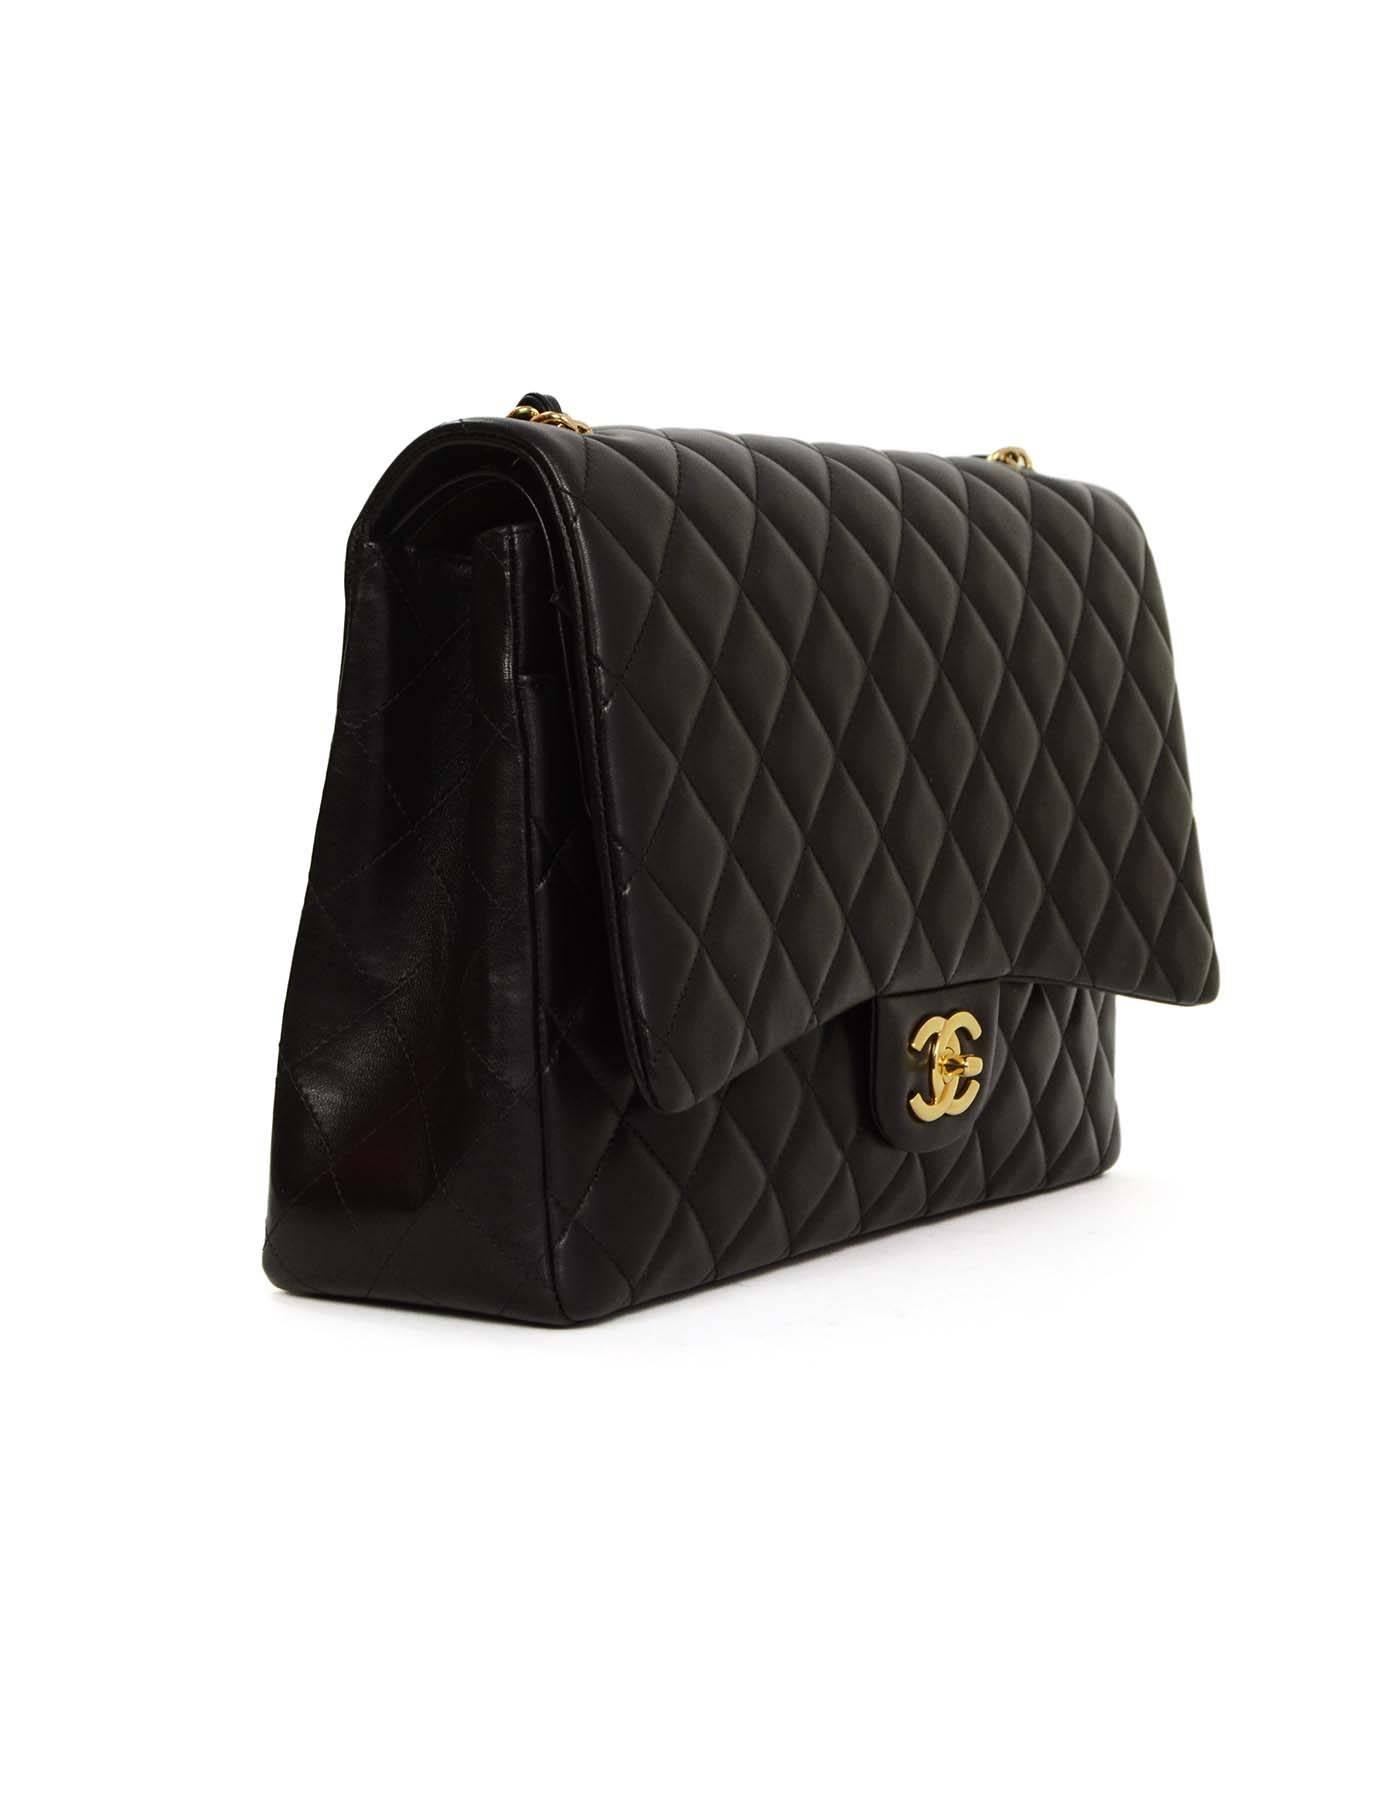 Chanel Black Quilted Lambskin Maxi Classic Flap Bag GHW
Features adjustable shoulder strap and single flap

Made in: France
Year of Production: 2014
Color: Black and goldtone
Hardware: Goldtone
Materials: Leather and metal
Lining: Black and burgundy